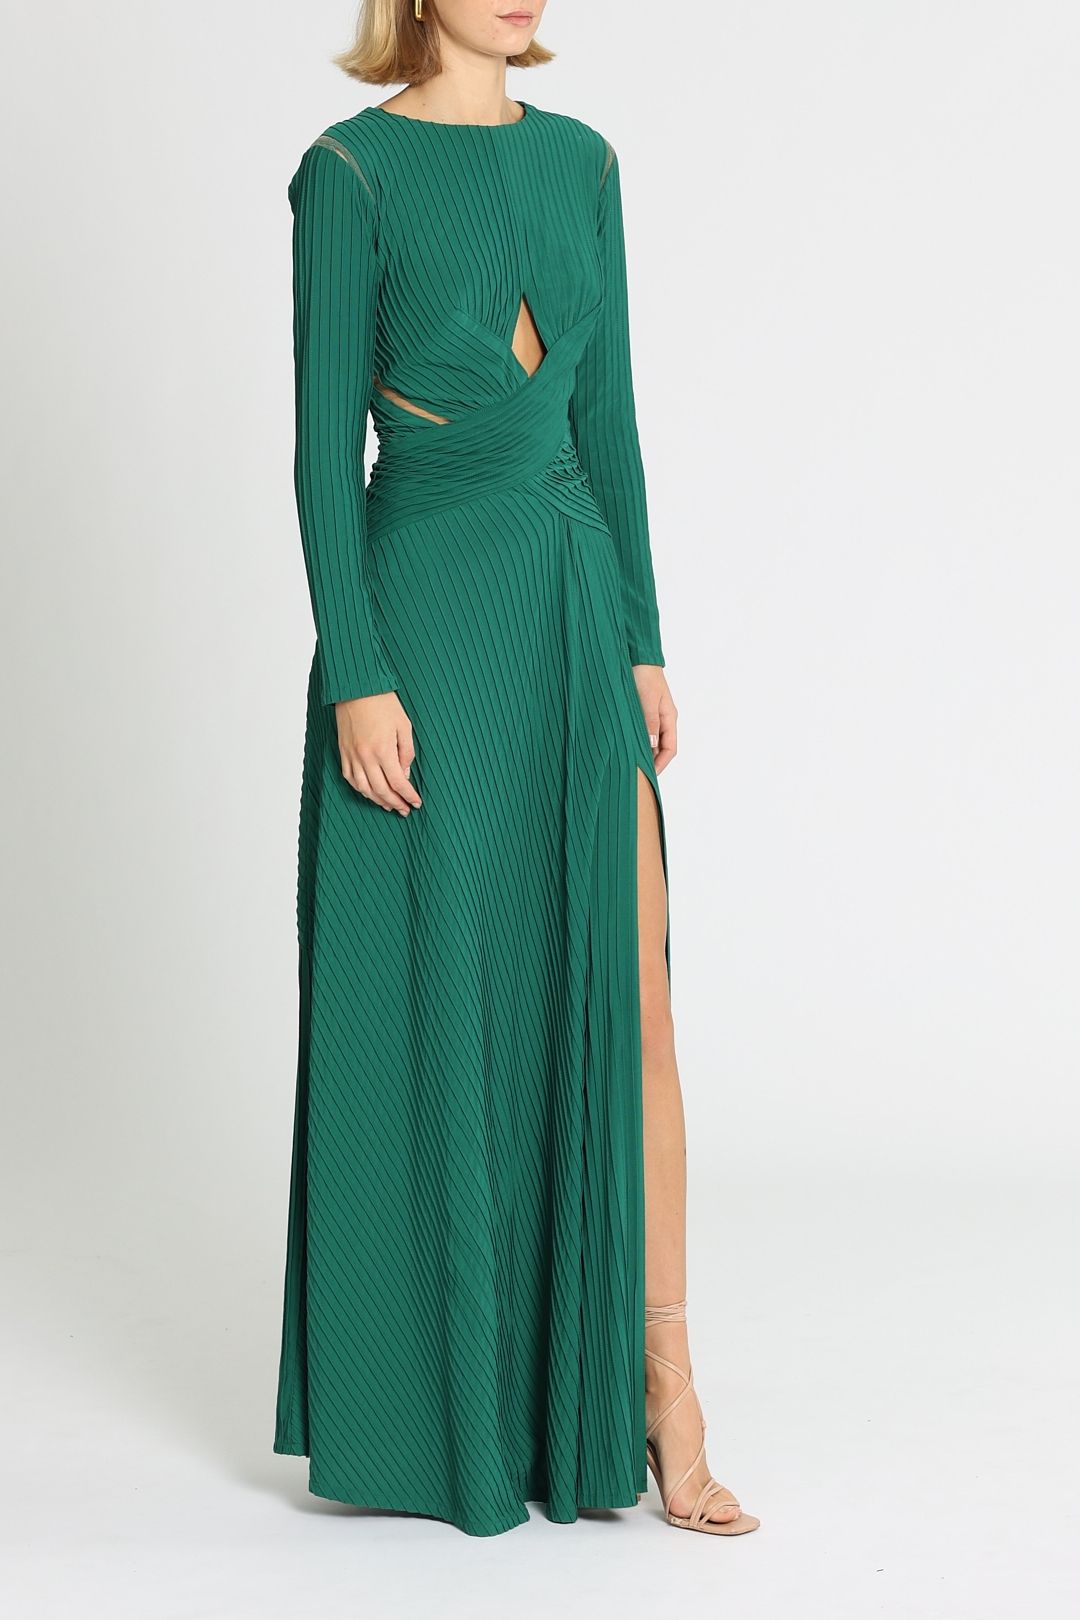 Bollani Pintuck Cutout Gown in Forest by Tadashi Shoji for Rent